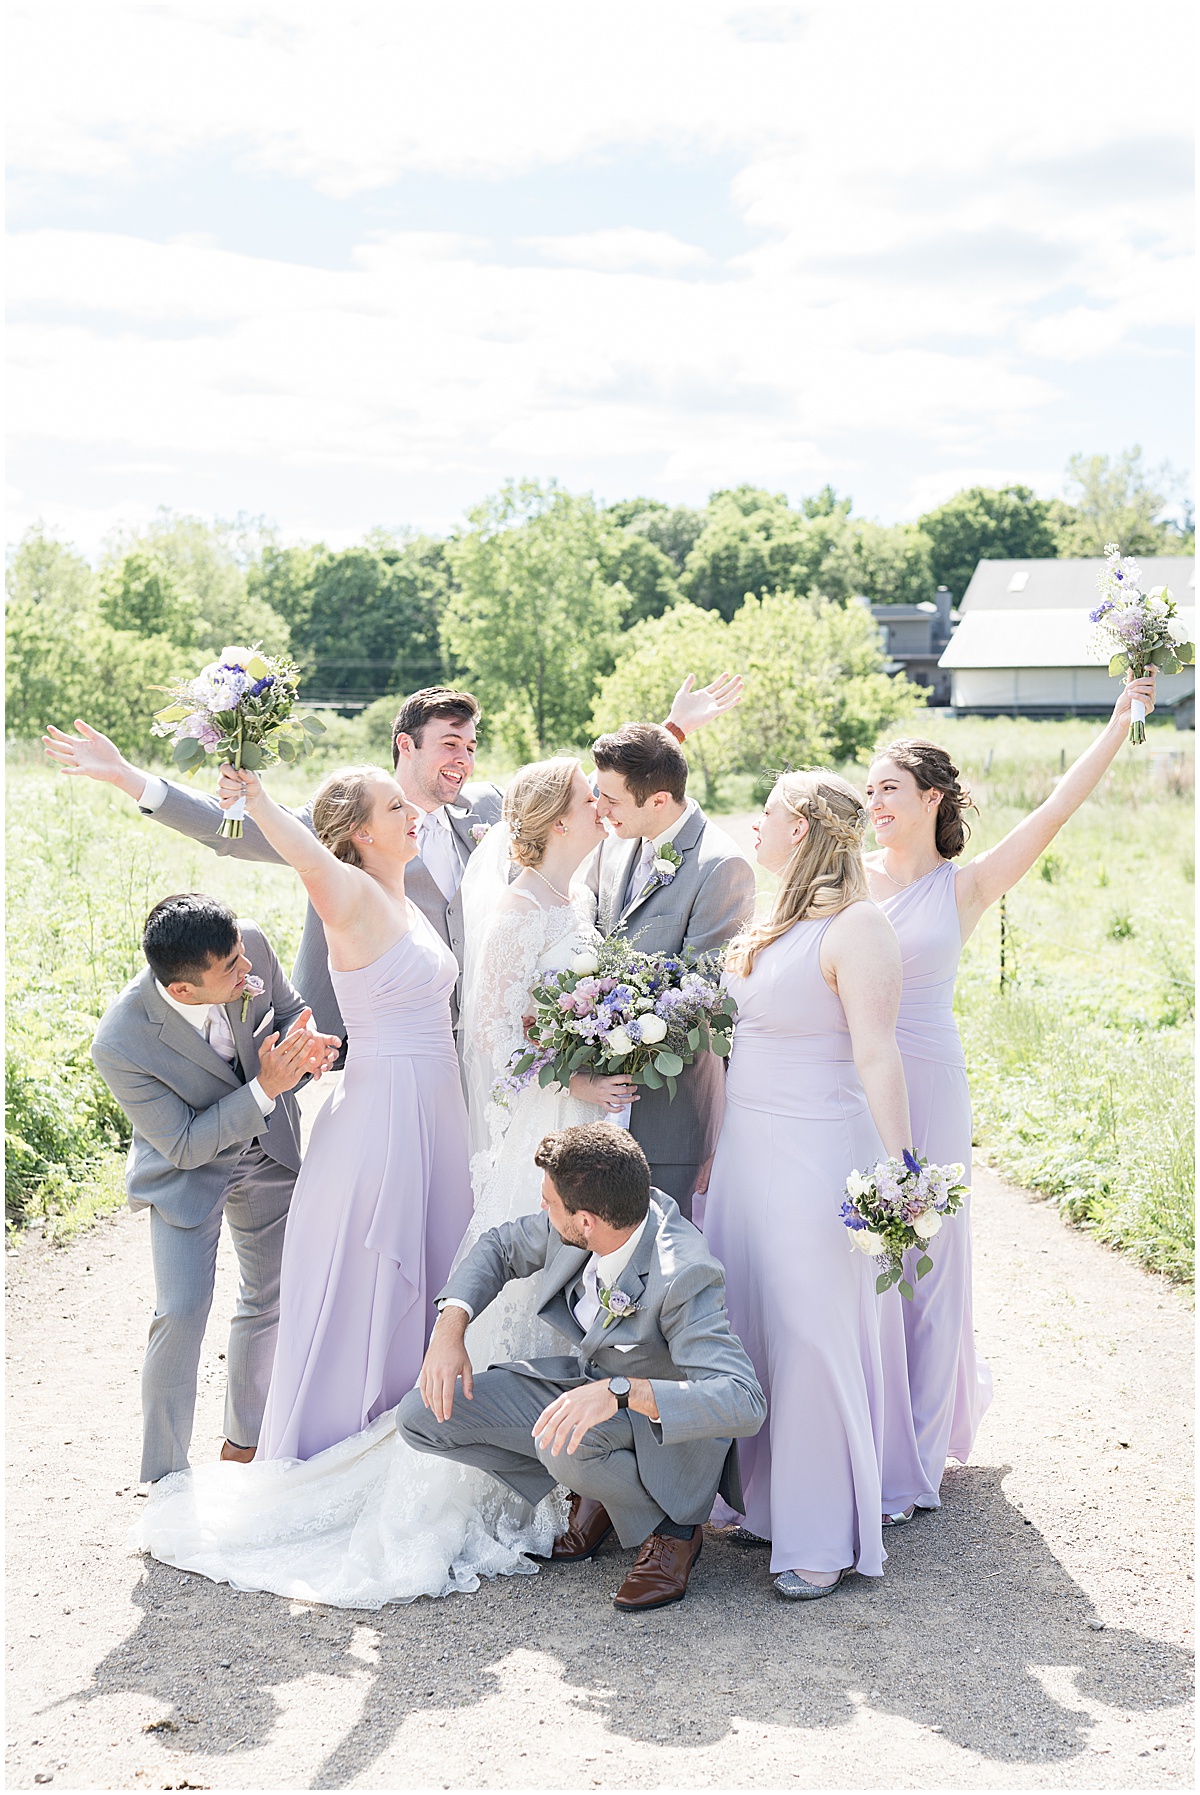 Wedding party photo at Traders Point Creamery wedding in Zionsville, Indiana